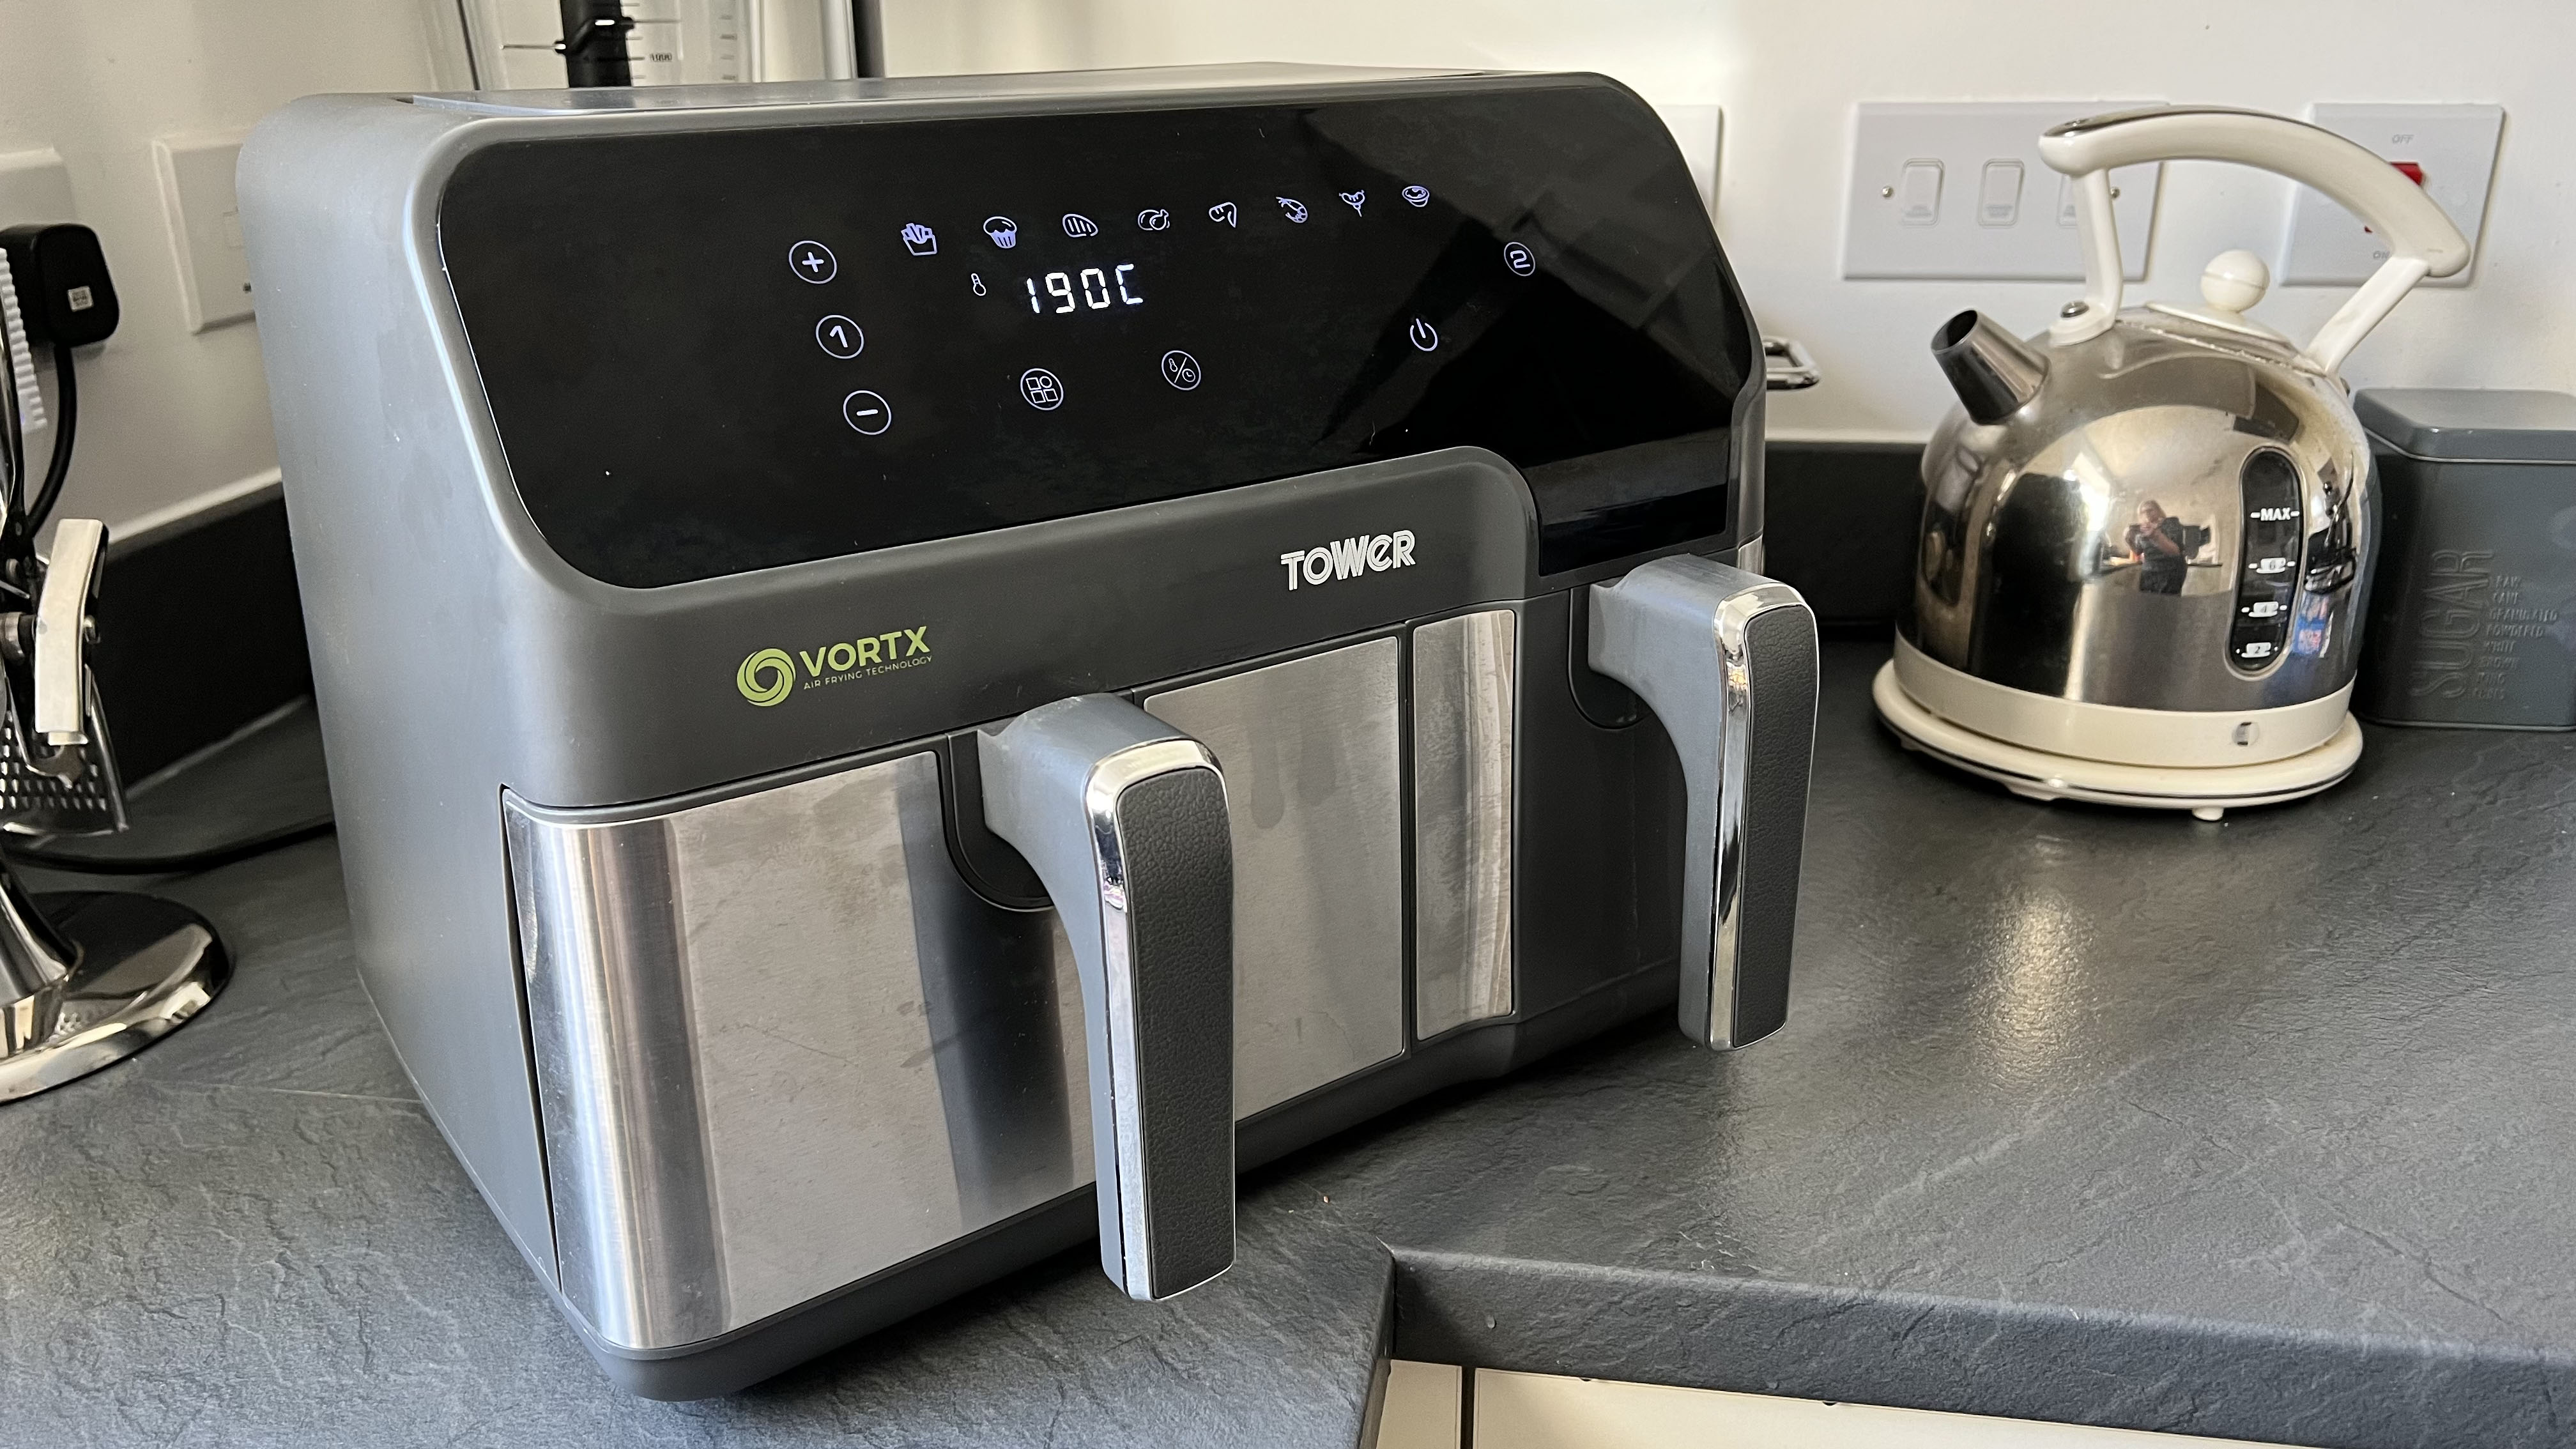 Tower Compact Air Fryer tried & tested review - Your Home Style